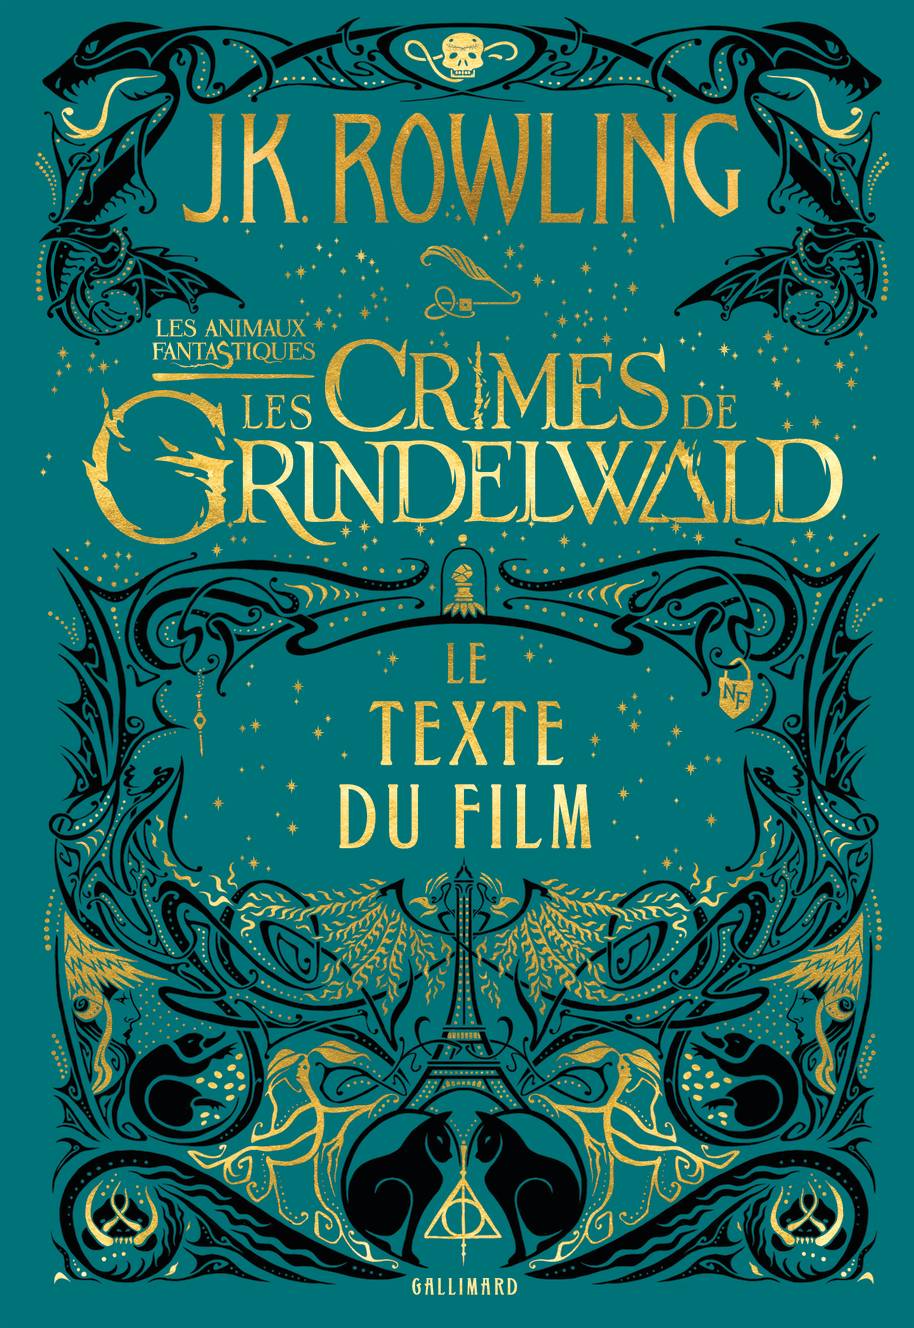 The French cover for Fantastic Beasts: The Crimes of Grindelwald, published by Gallimard